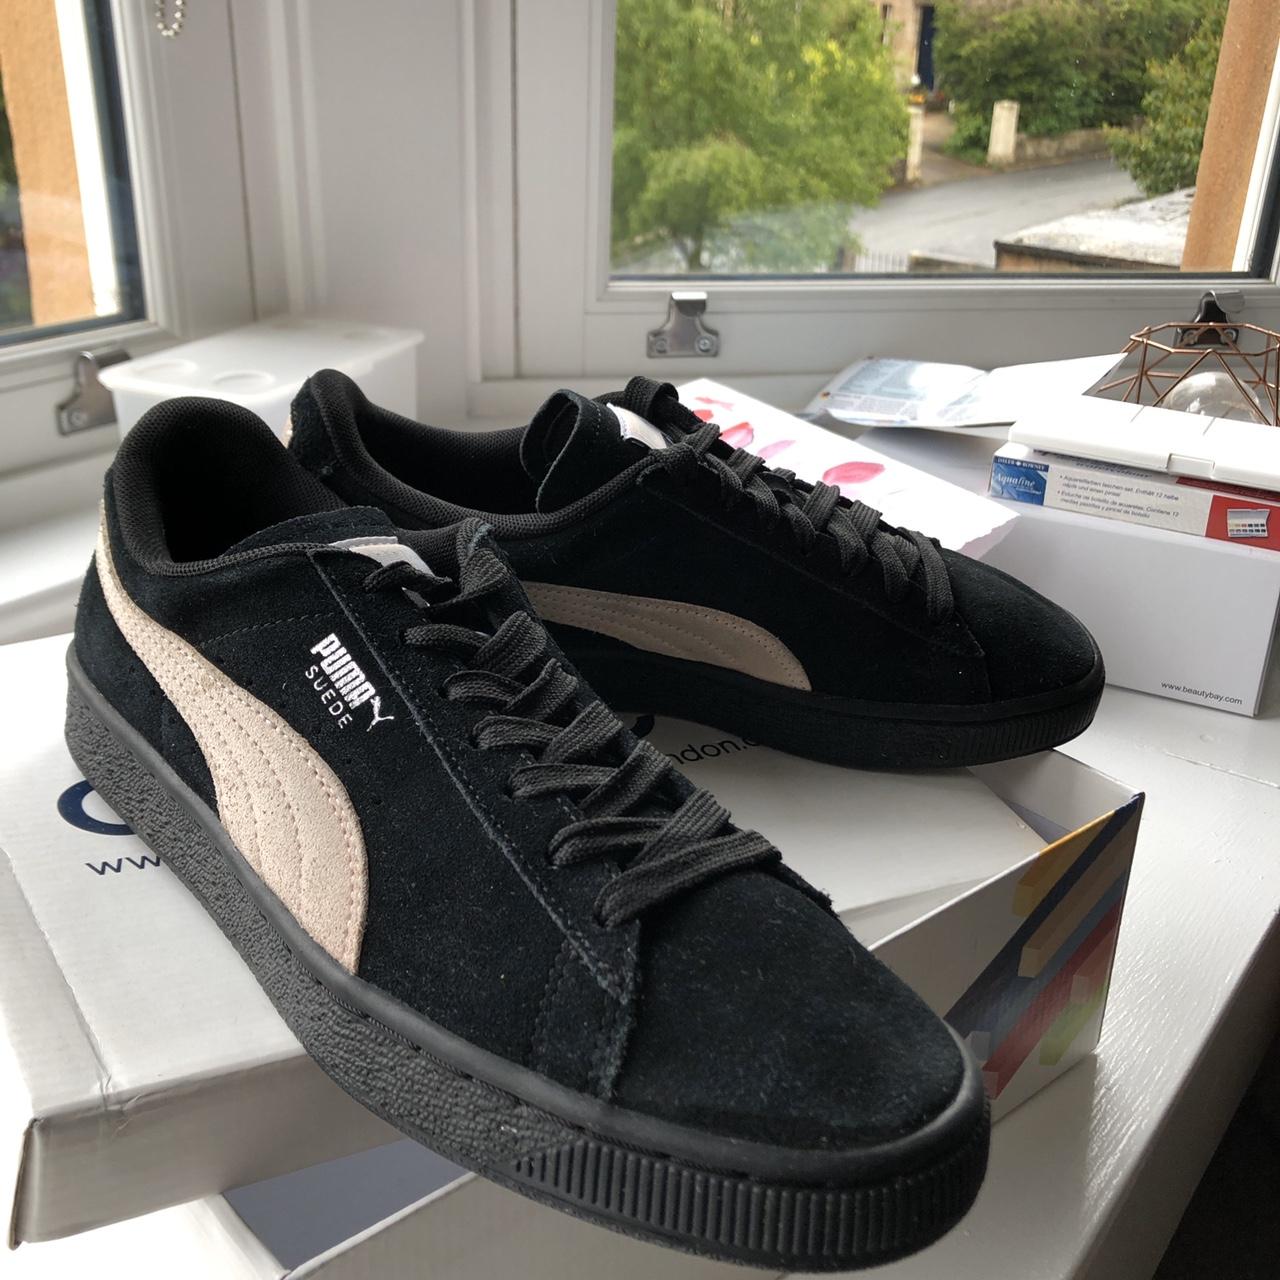 👟Black and Pink Puma Suede Trainers with black sole👟... - Depop